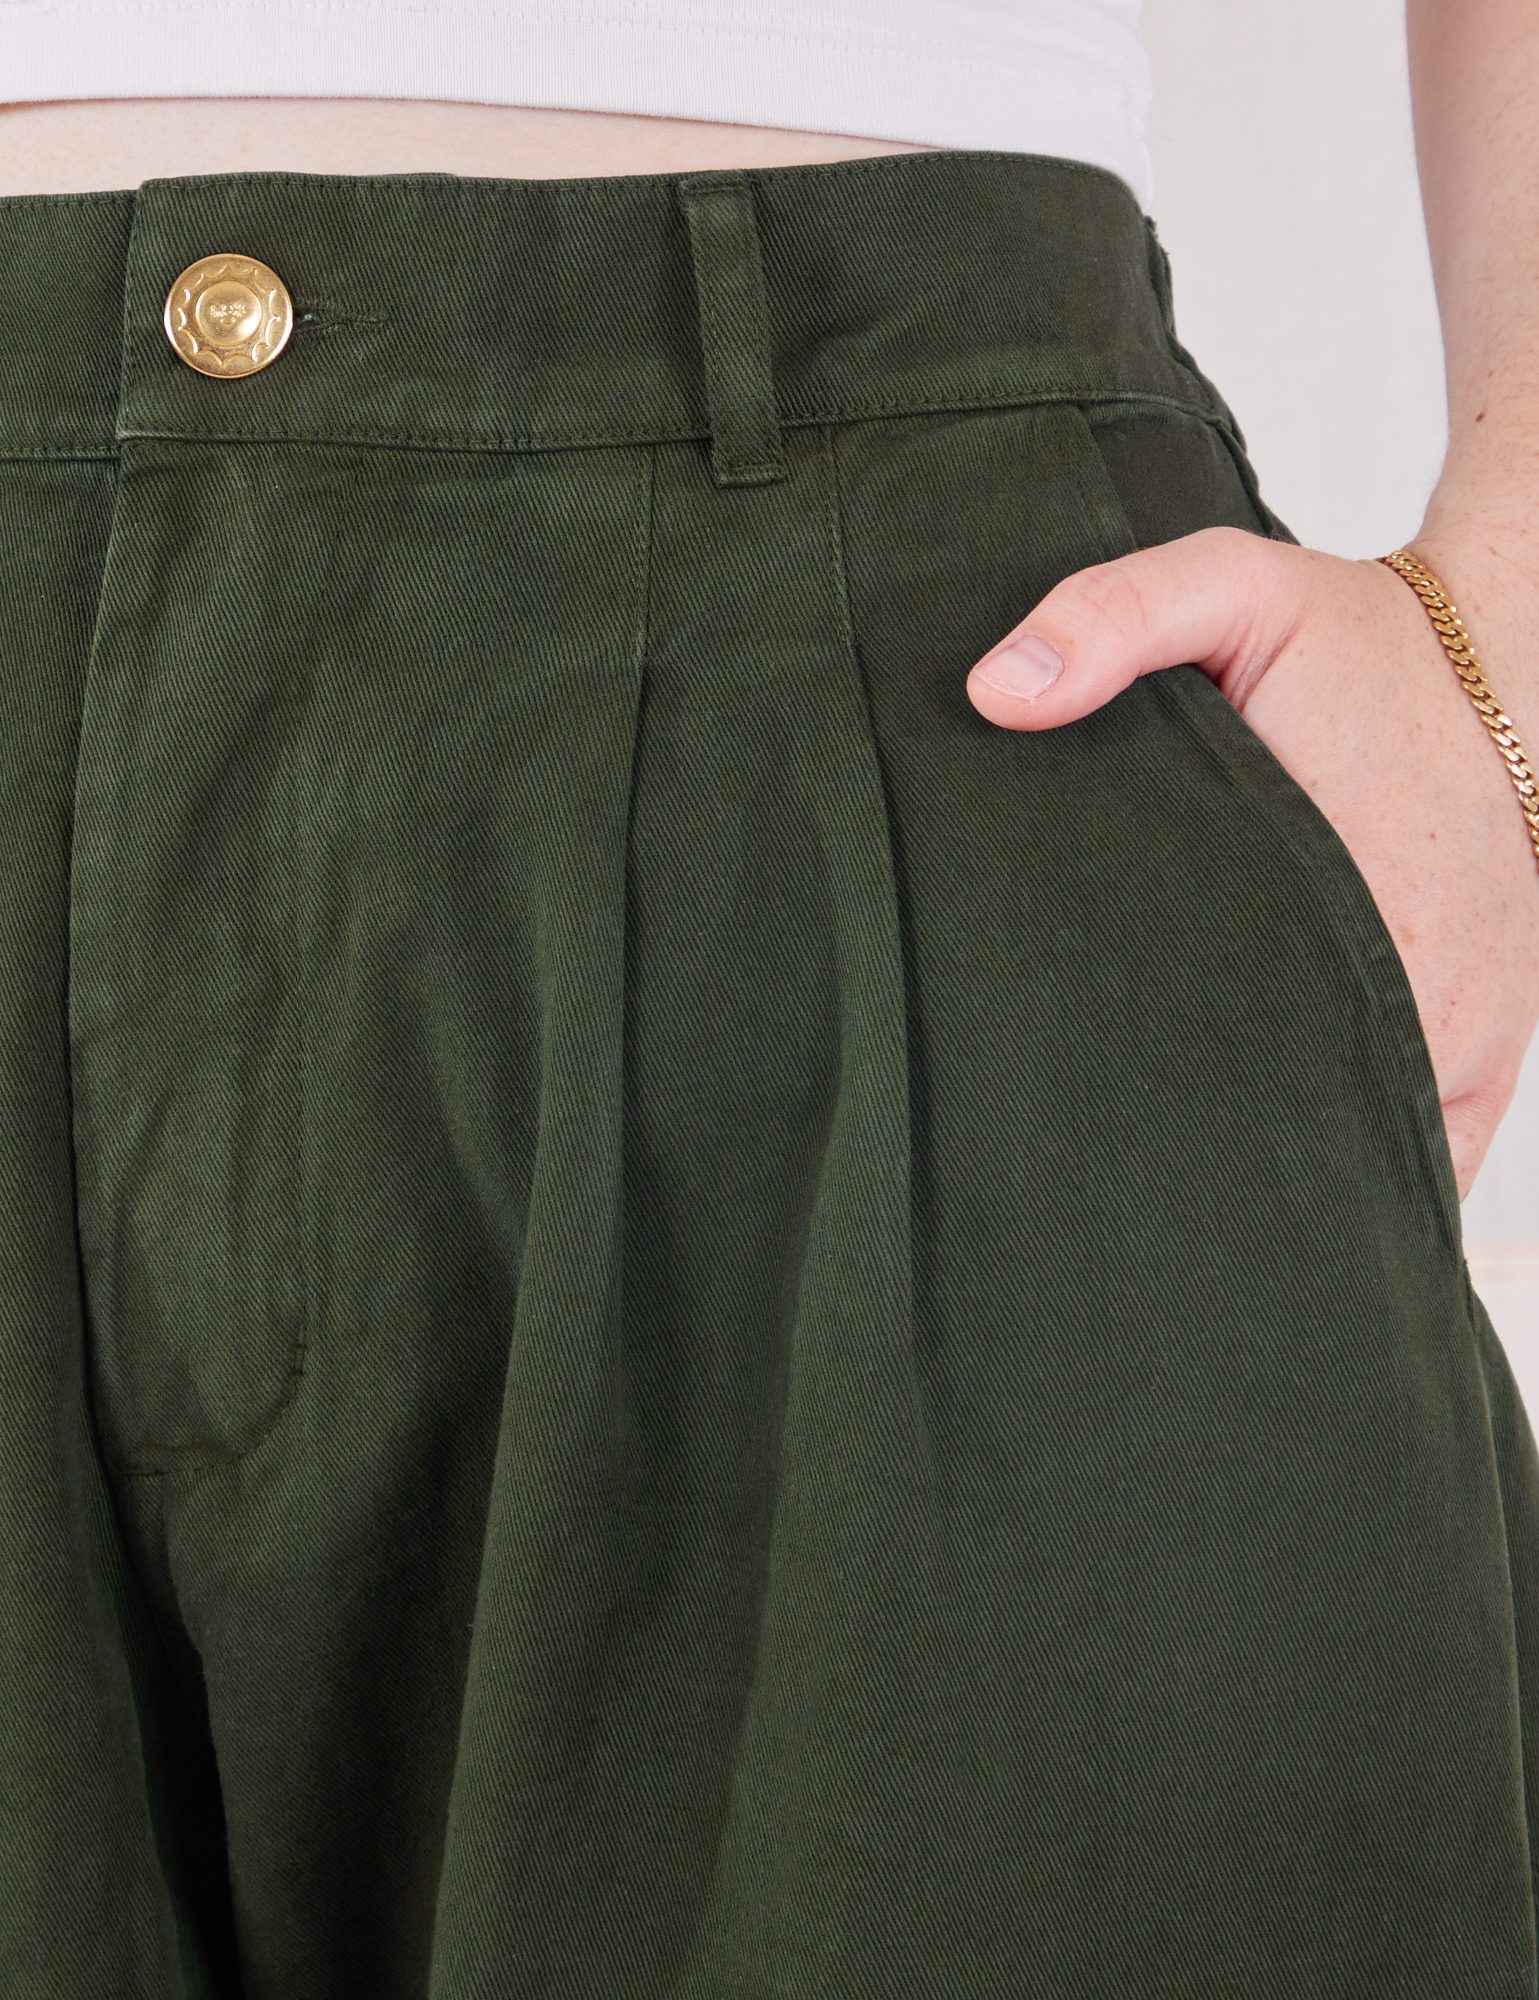 Heavyweight Trousers in Swamp Green front close up. Hana has her hand in the pocket